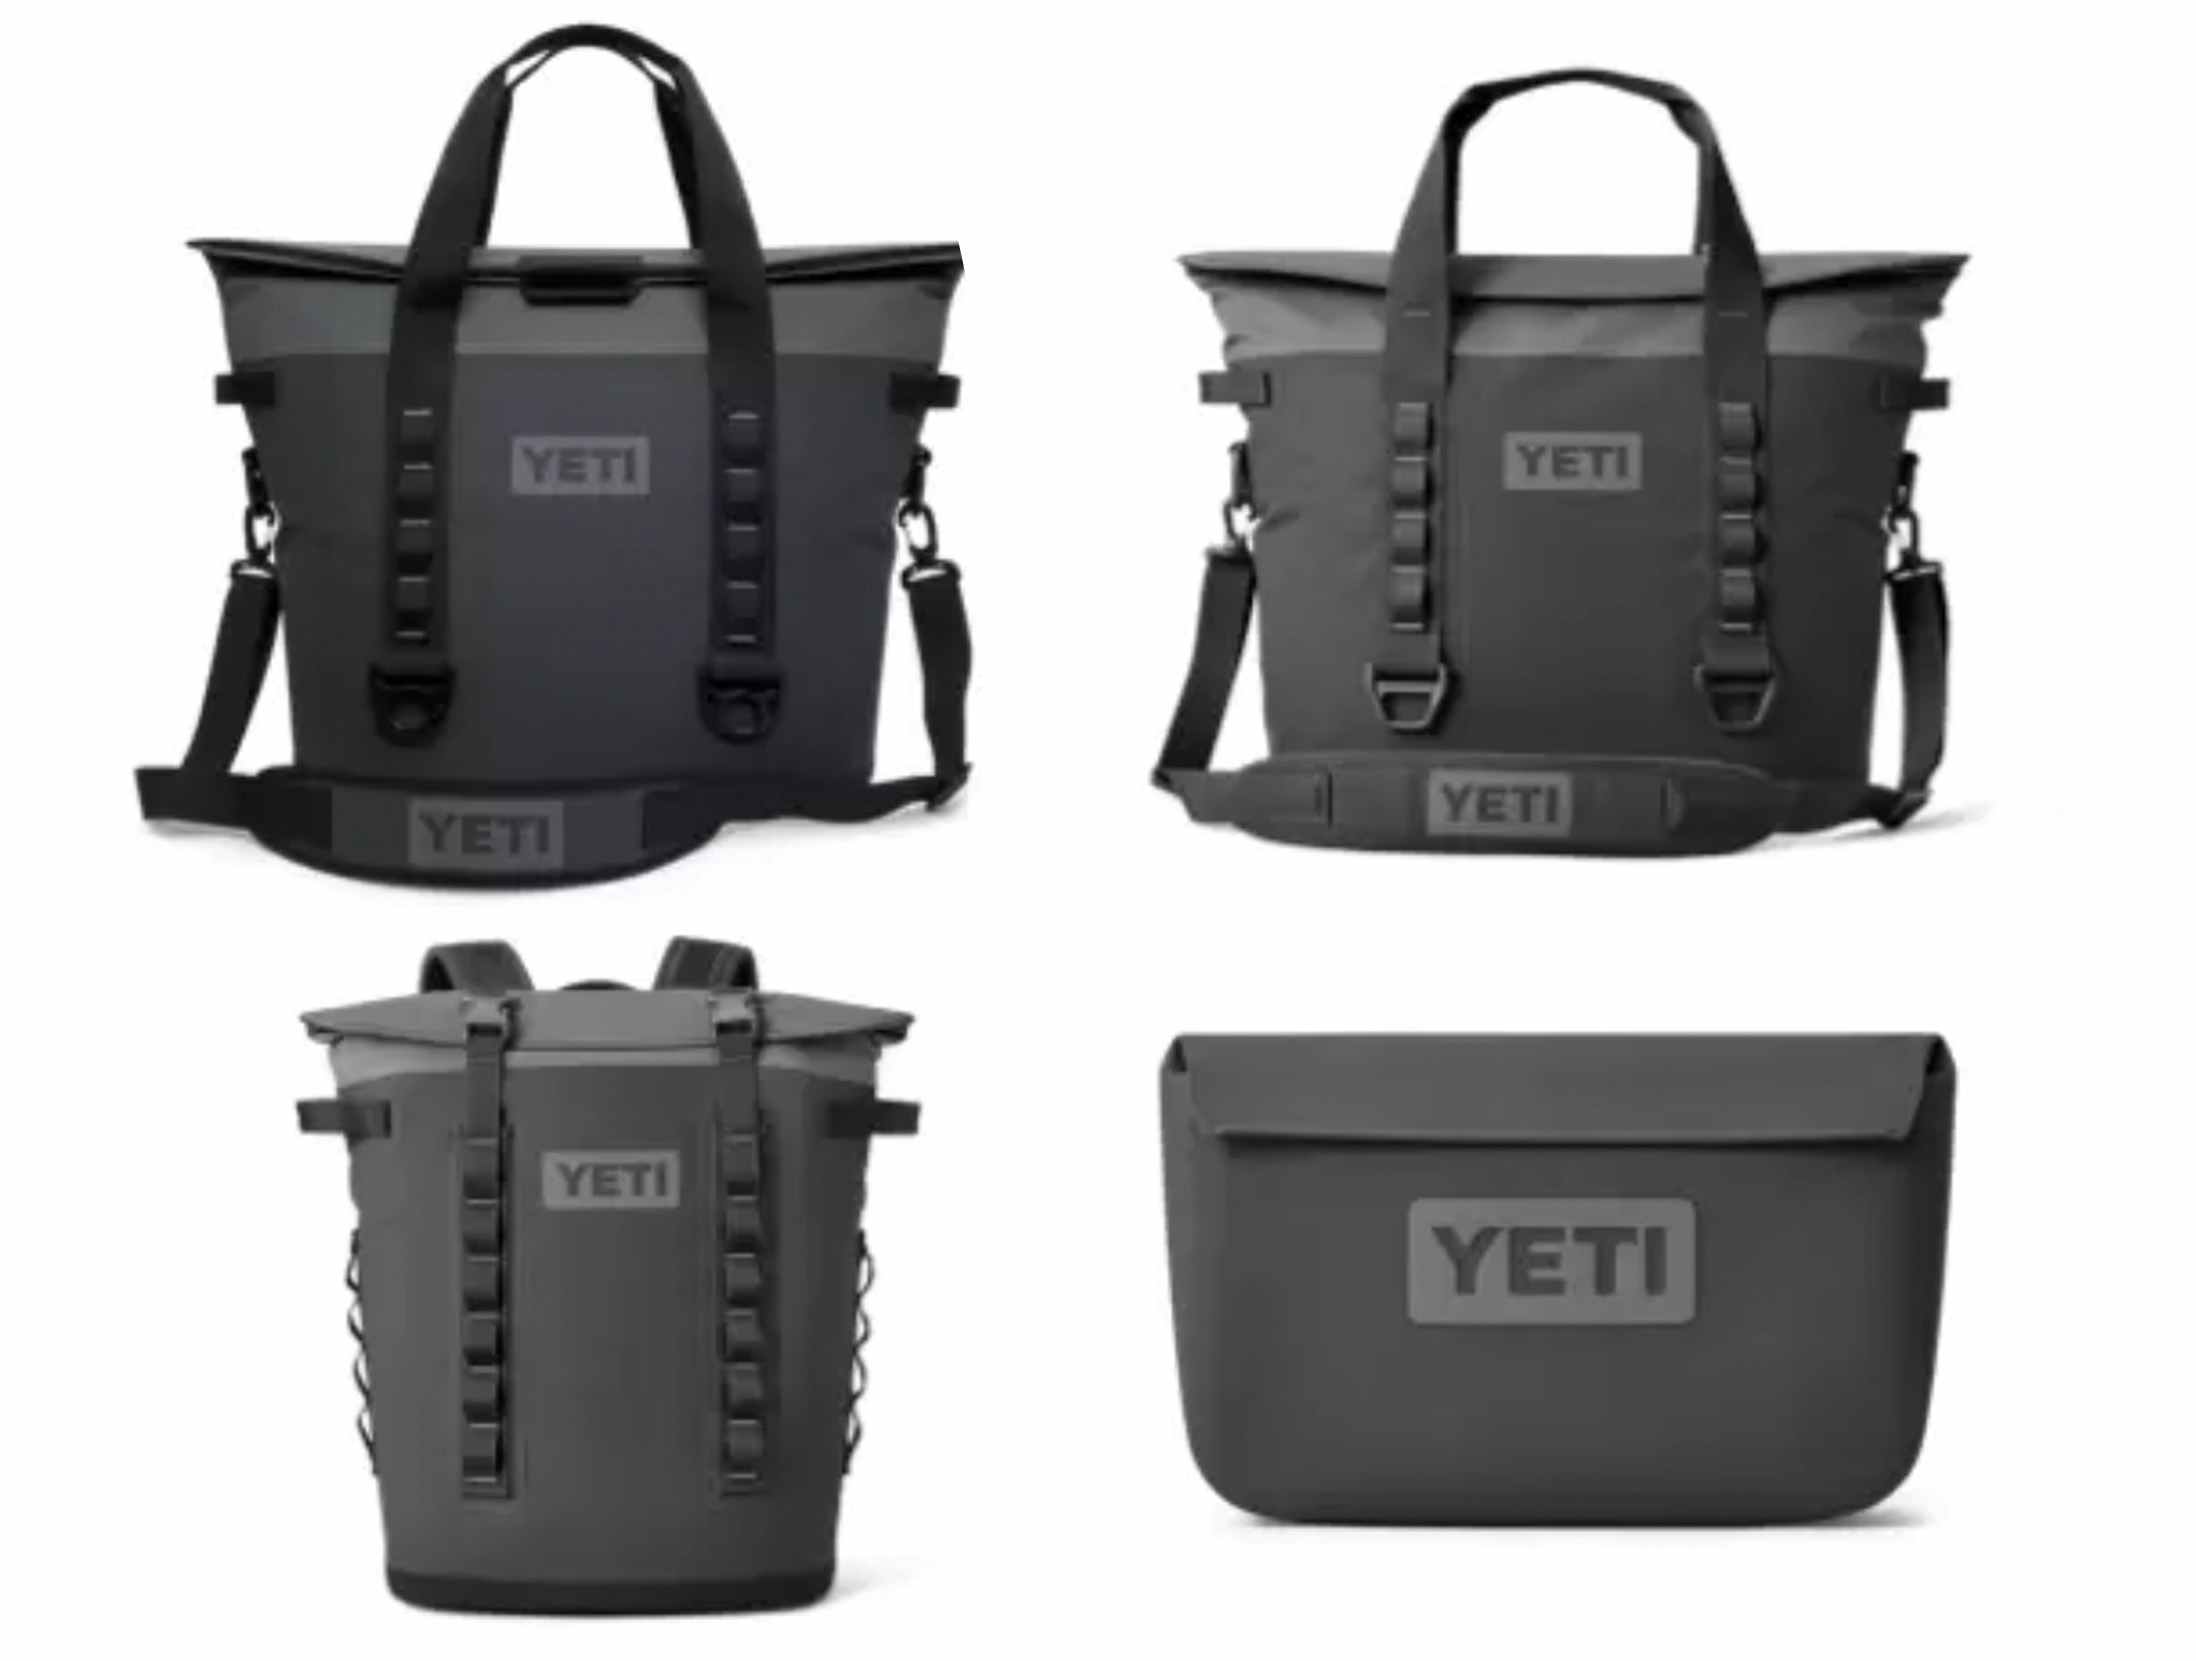 The four models of product that are included in the 2023 Yeti recall.